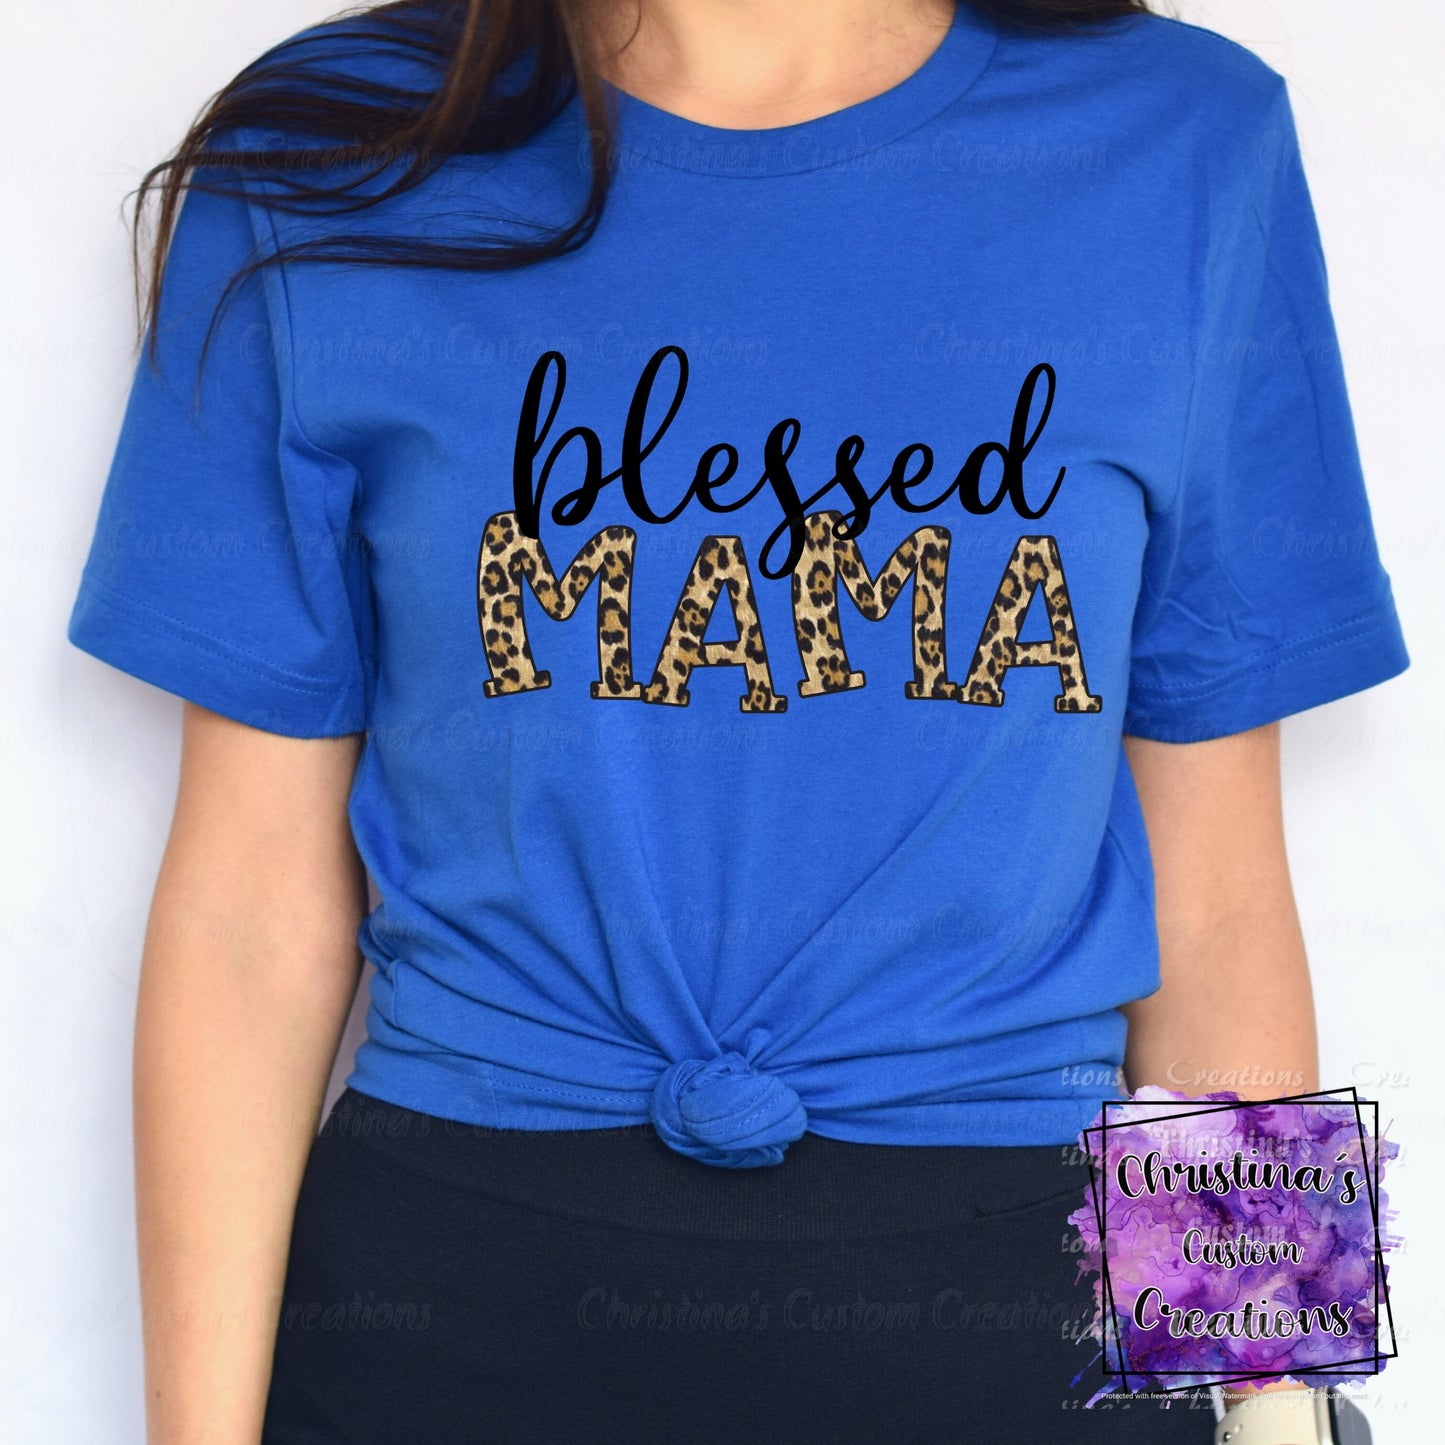 Blessed Mama T-Shirt | Trendy Mama Shirt | Fast Shipping | Super Soft Shirts for Women | Gift for Mom